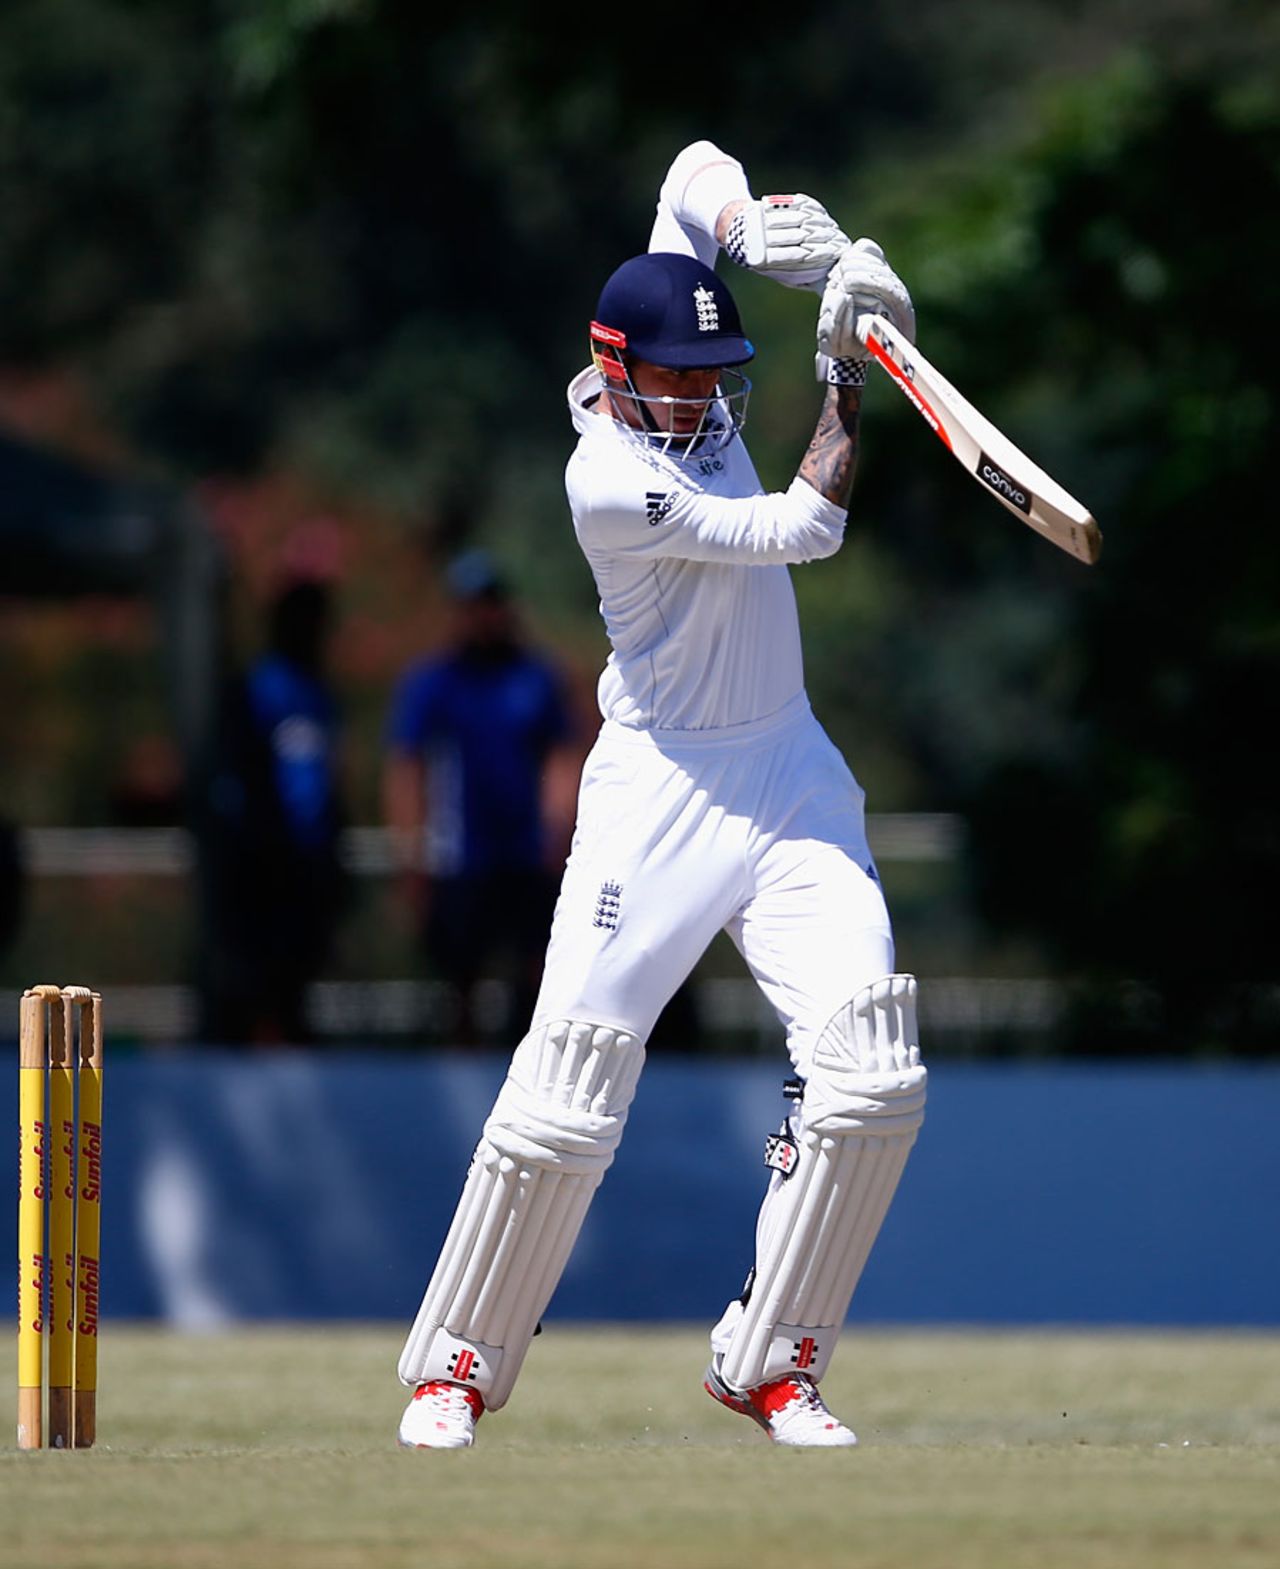 Alex Hales made 56 before leaving a straight delivery, South Africa A v England XI, Tour match, Pietermaritzburg, December 20, 2015